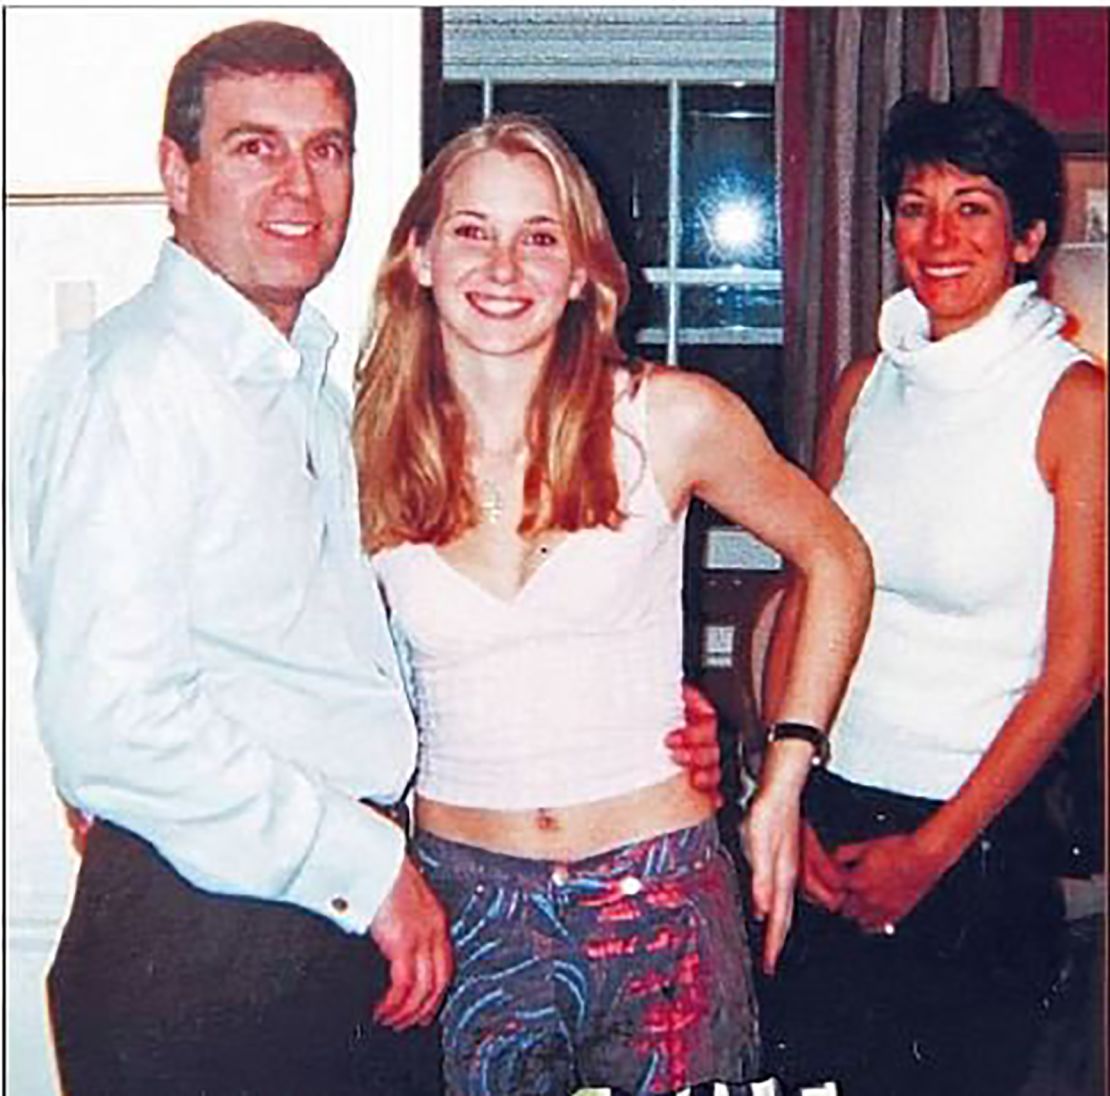 A photograph shows Prince Andrew with Virginia Roberts Giuffre and, in the background, Ghislaine Maxwell.